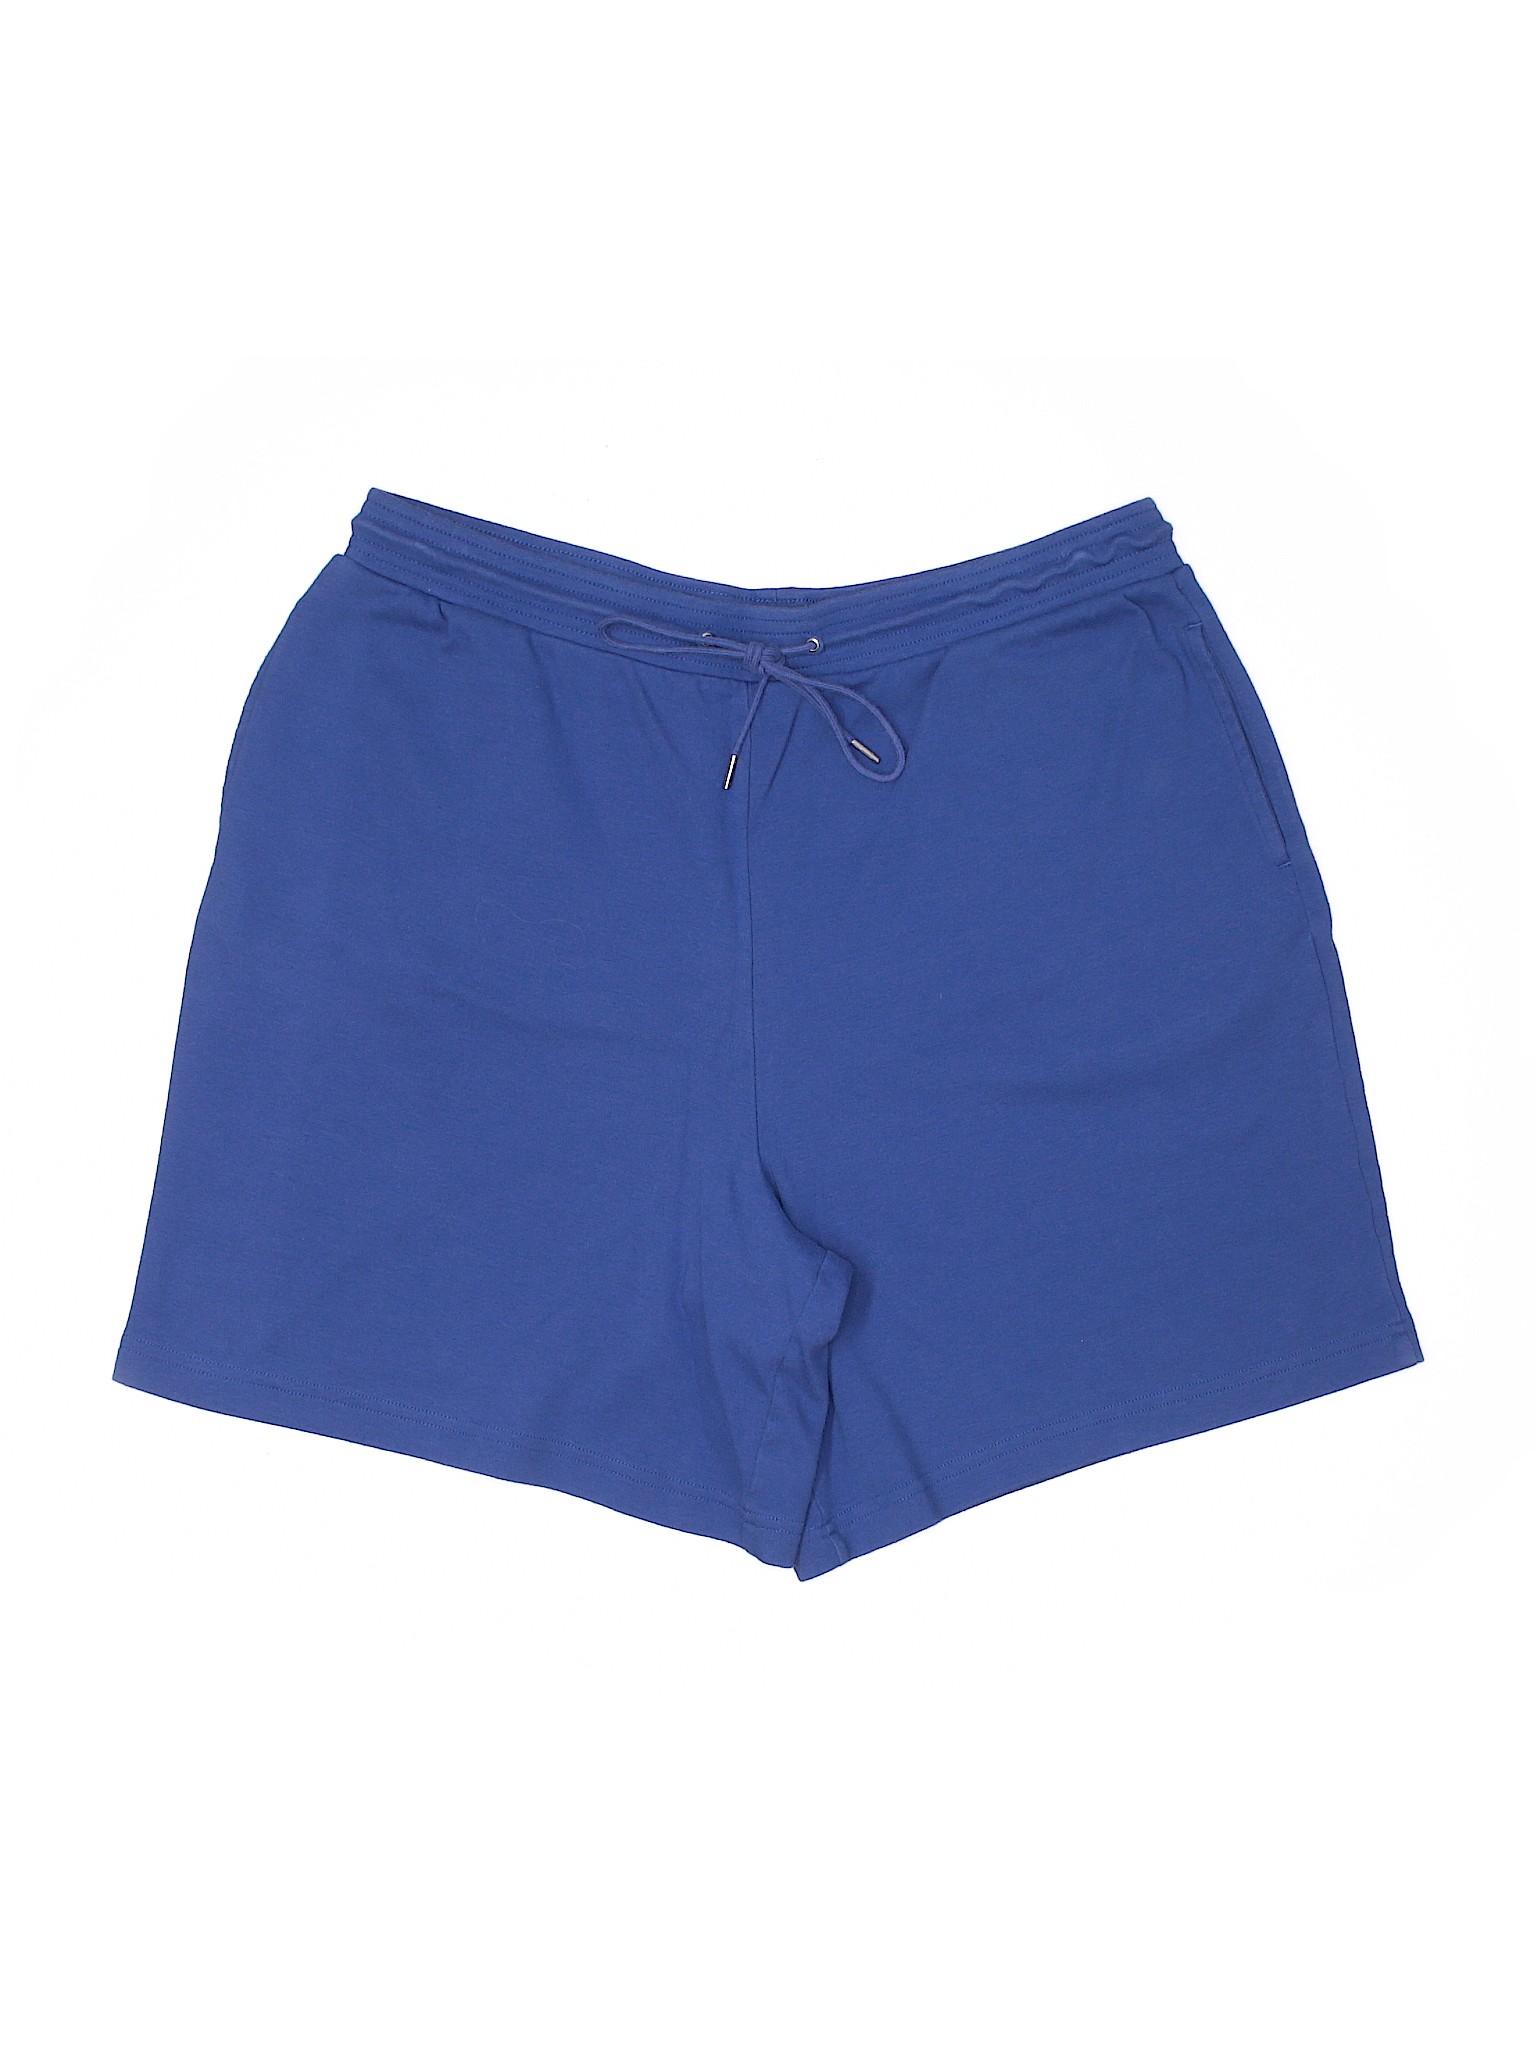 Hasting & Smith Solid Blue Shorts Size XL - 41% off | thredUP